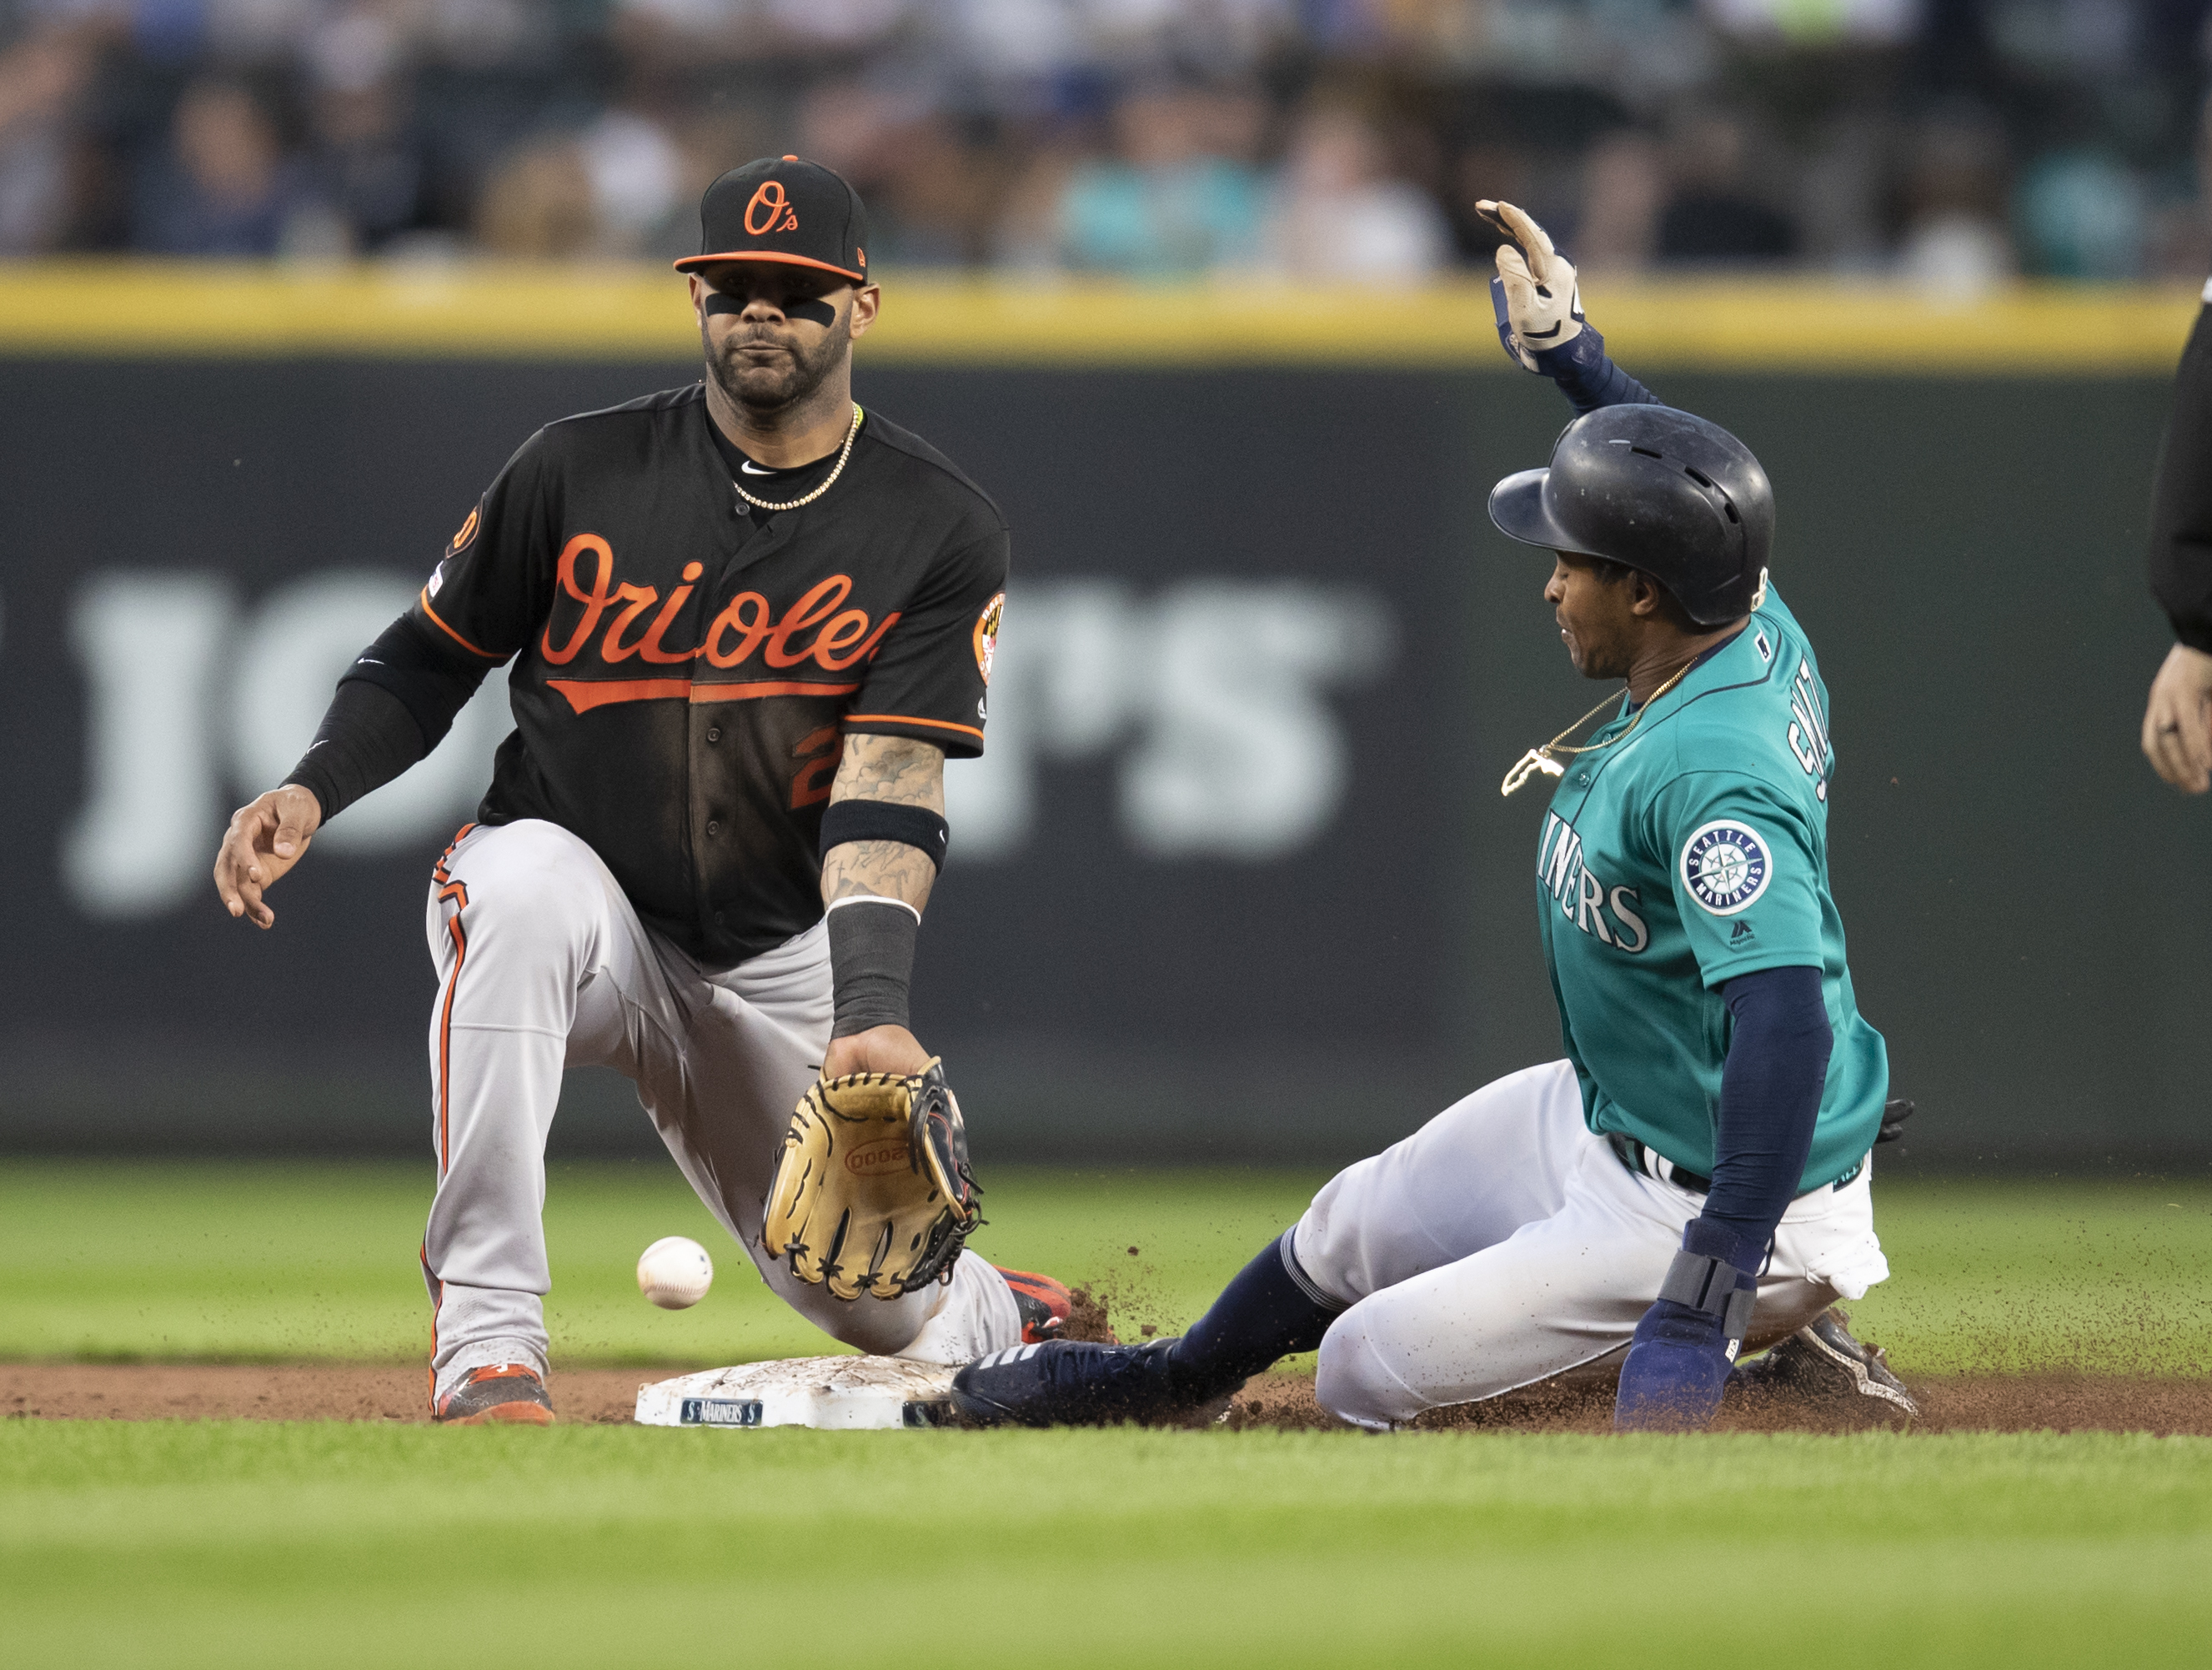 Mariners win 10-9, hand Orioles 10th straight loss